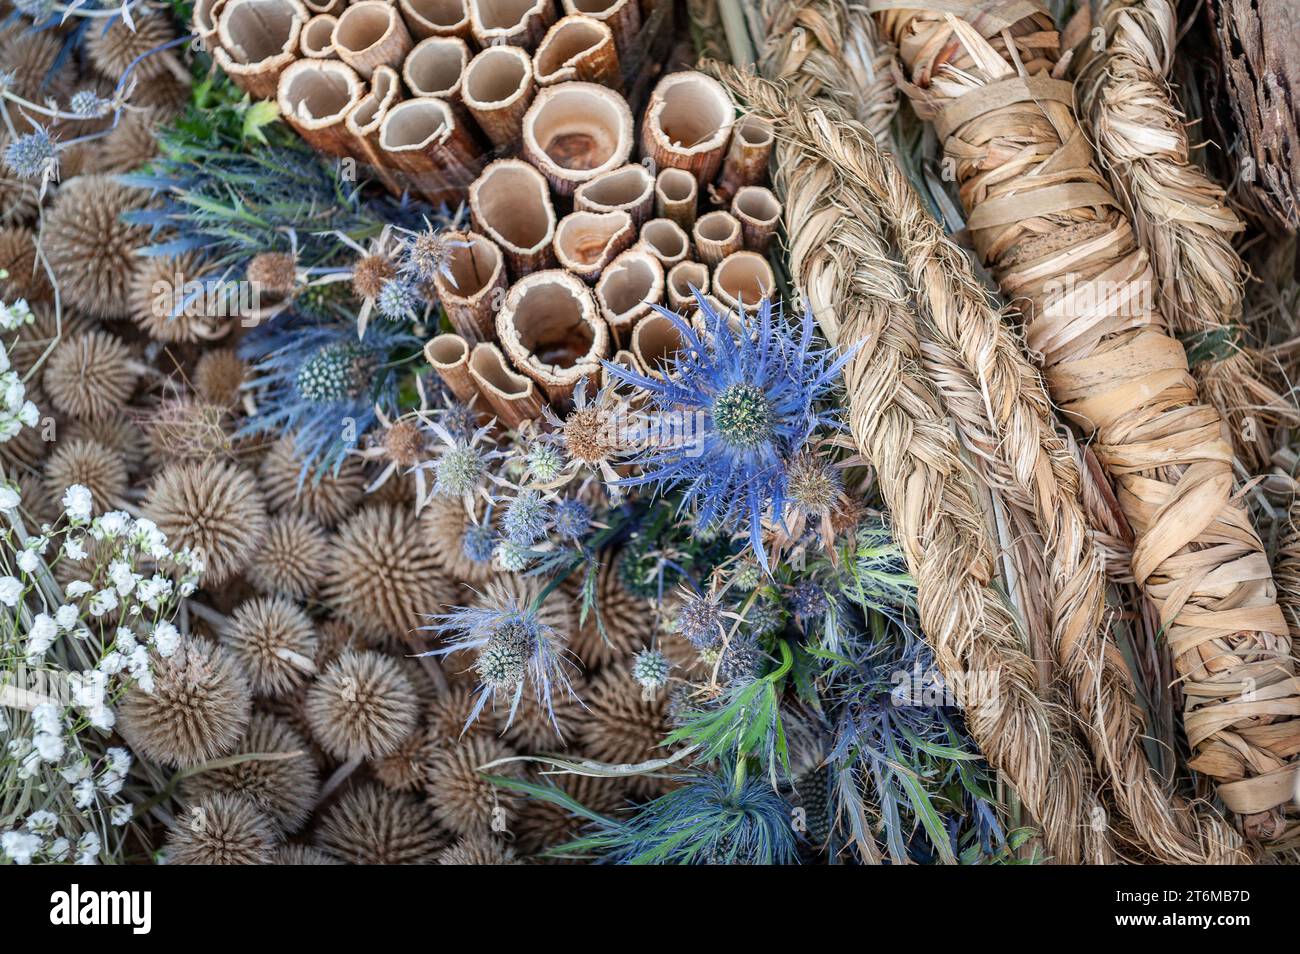 Mixed flowers backdrop. Floral background of echinops, eryngium and braids from dry plants in natural hues. Stock Photo